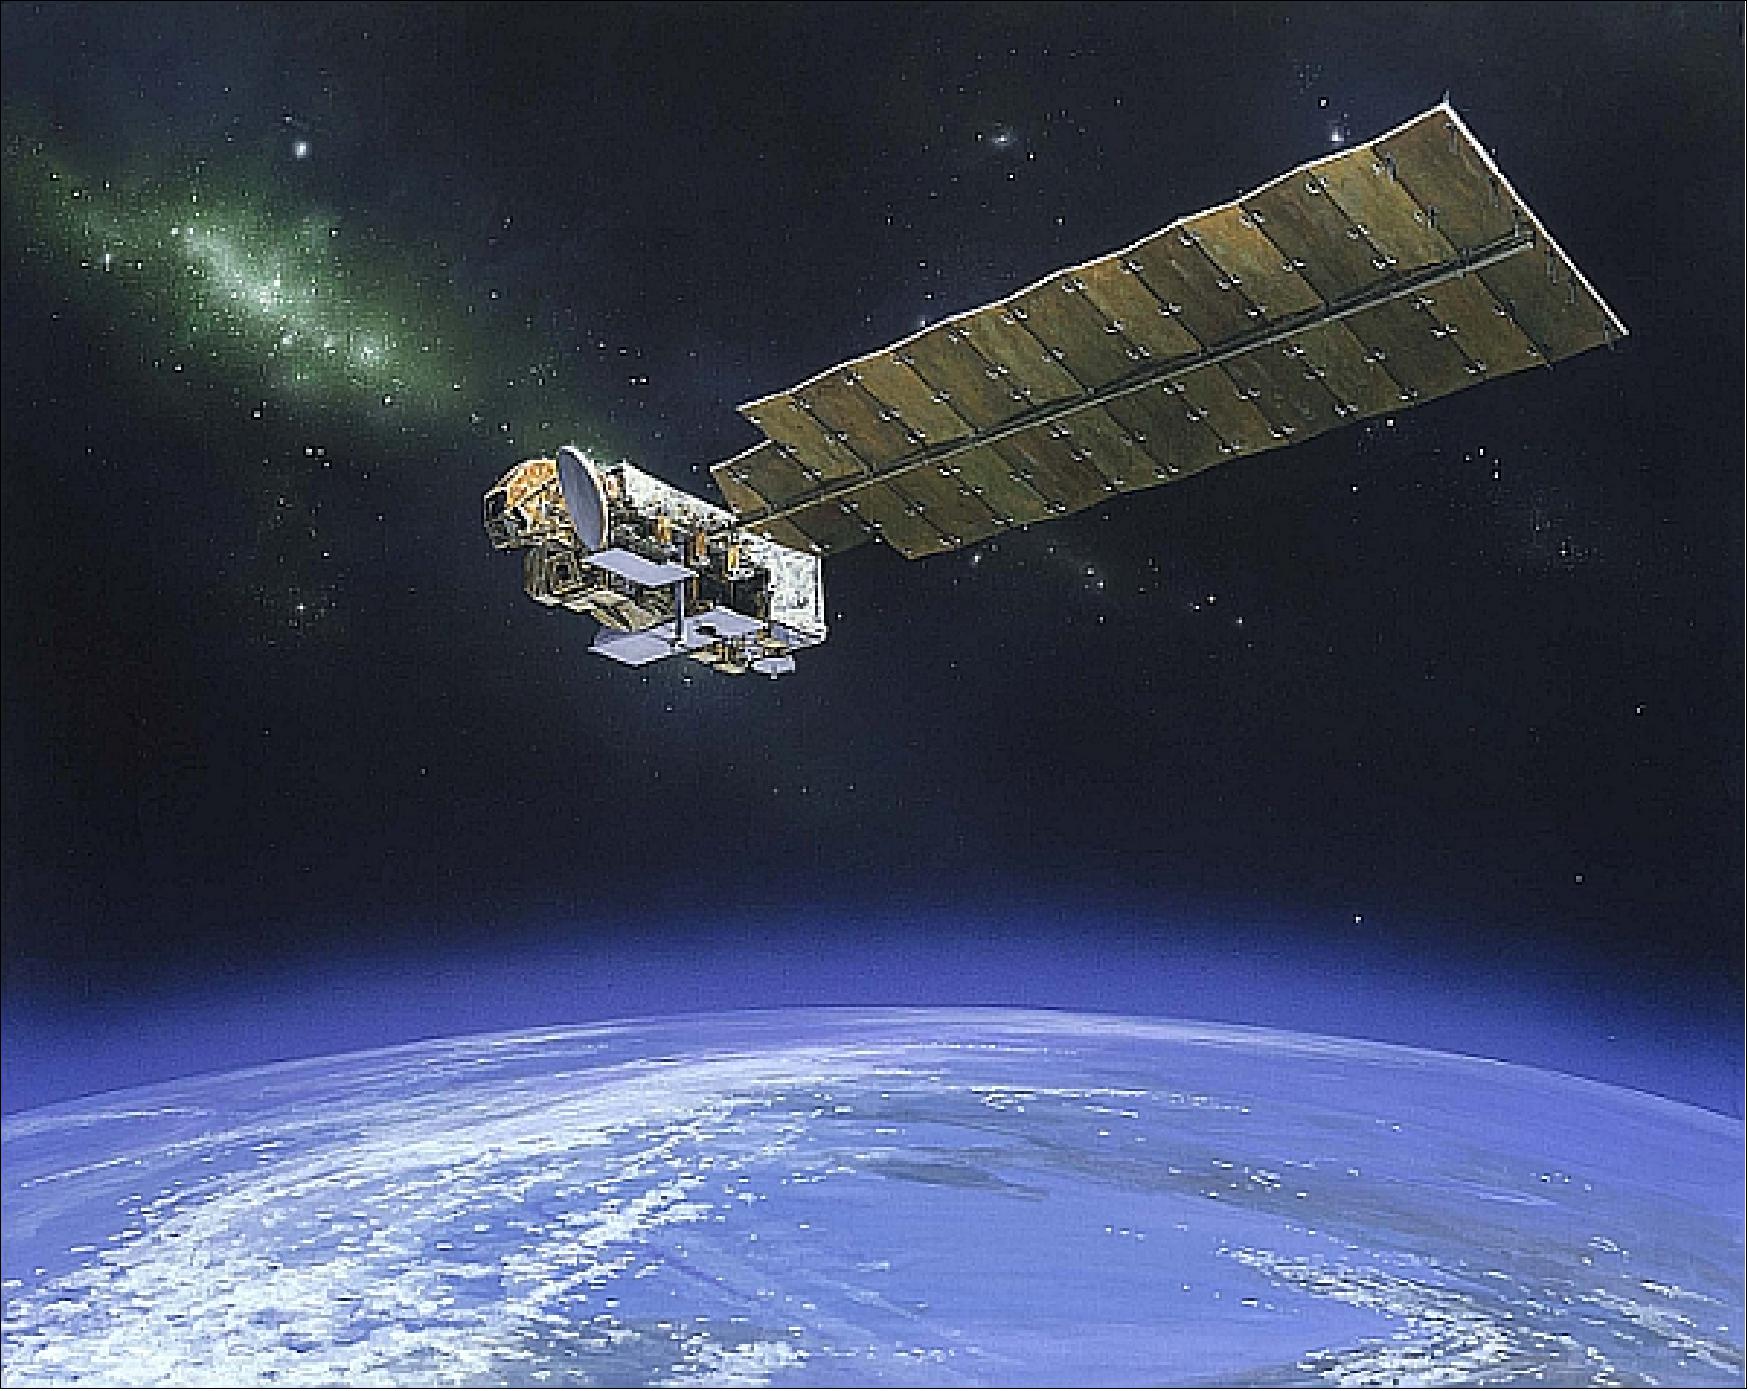 Figure 1: Artist's rendition of the Aura spacecraft )image credit: NGST)